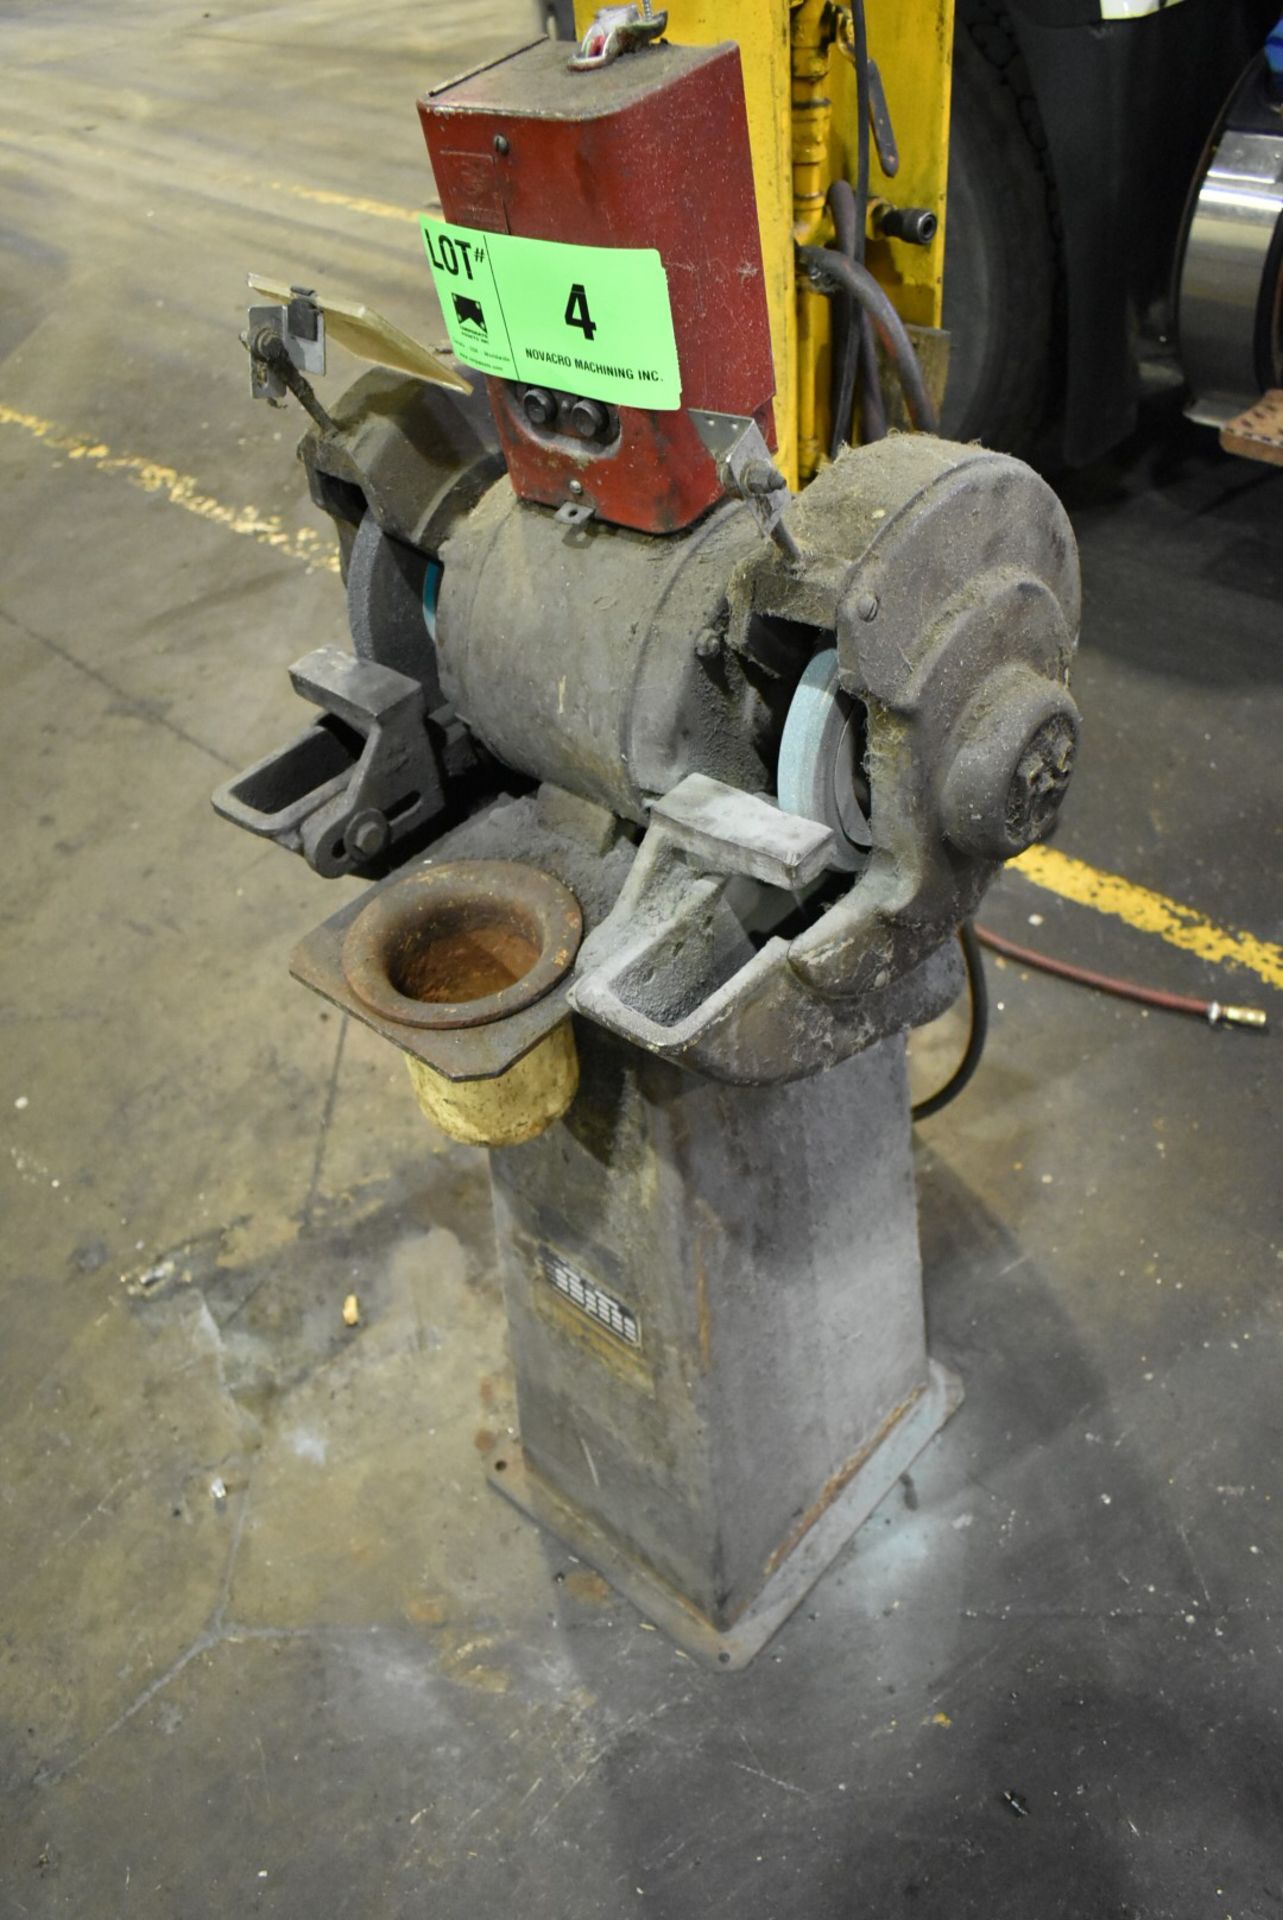 FORD-SMITH MODEL 40 10" DOUBLE END PEDESTAL GRINDER WITH SPEEDS TO 1725 RPM, S/N: 66412 (CI) [ - Image 2 of 3